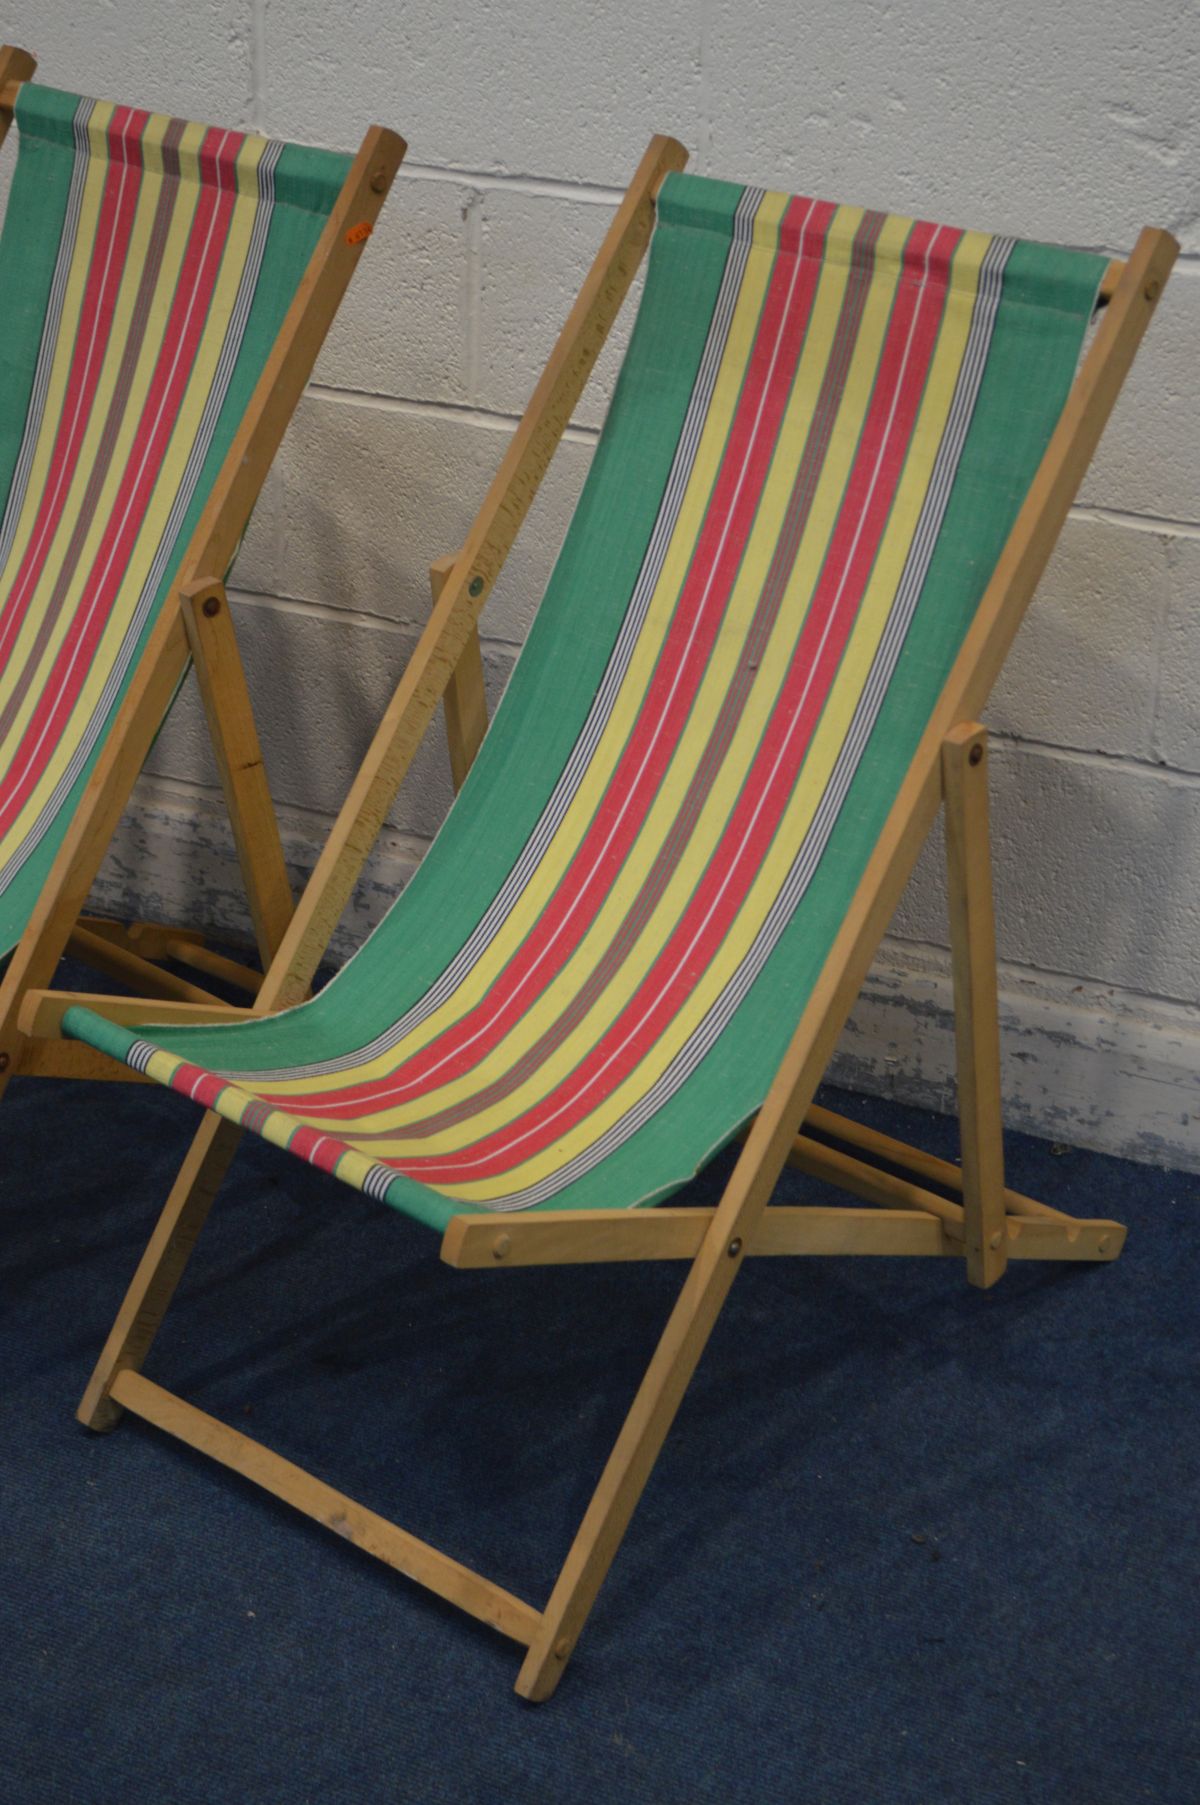 THREE RETRO STRIPPED FOLDING DECK CHAIRS - Image 2 of 2